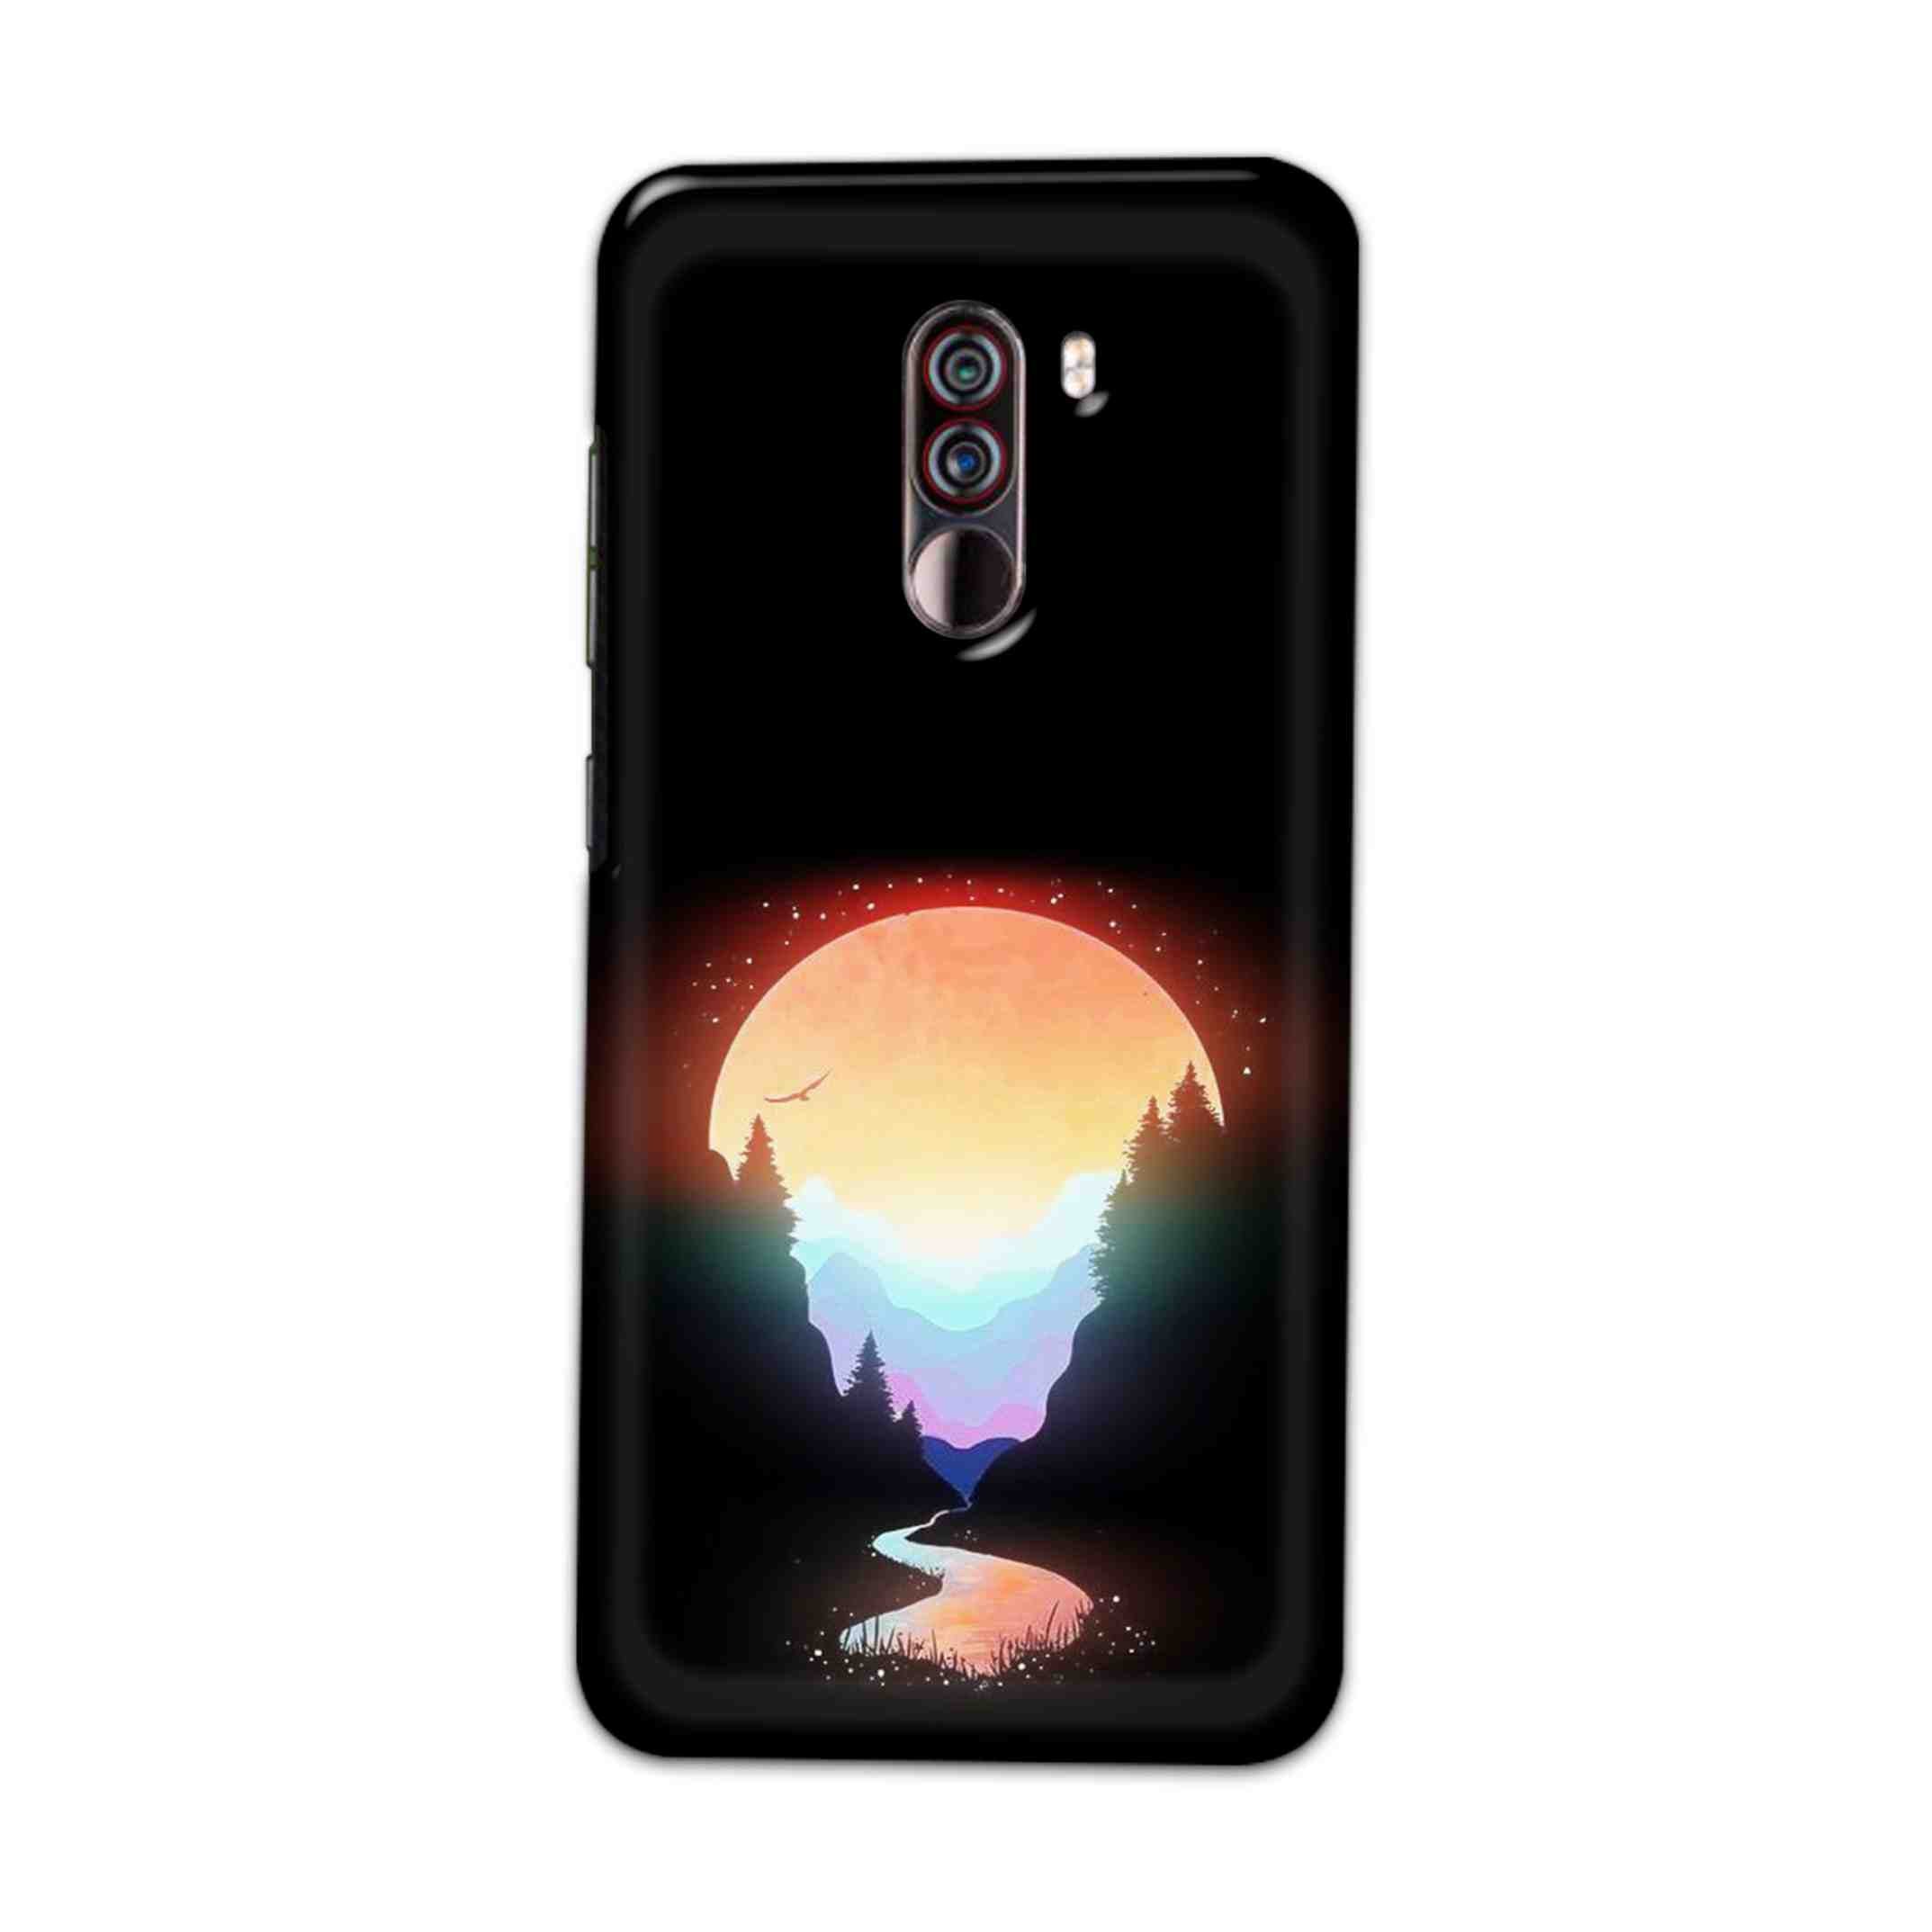 Buy Rainbow Hard Back Mobile Phone Case Cover For Xiaomi Pocophone F1 Online